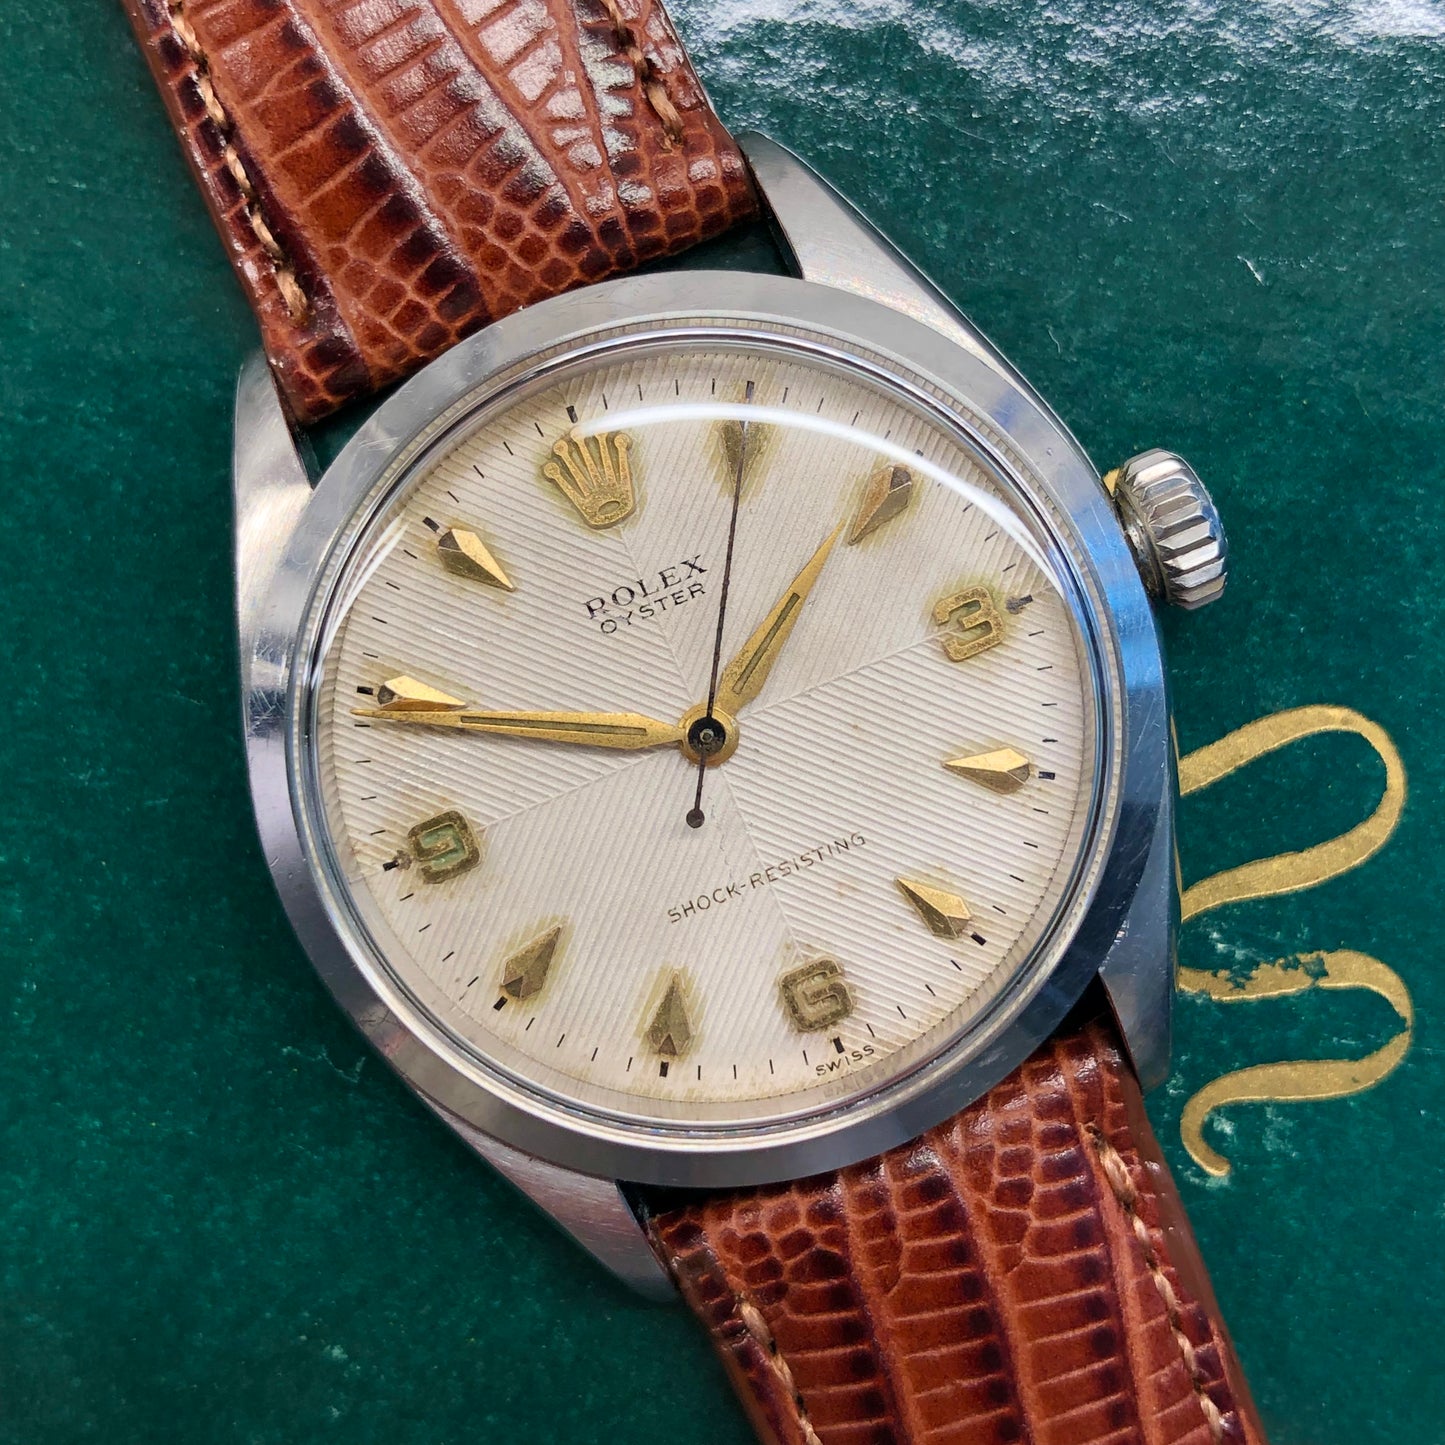 1956 Rolex Oyster Precision 6480 Chevron Dial Stainless Steel Vintage Wristwatch - Hashtag Watch Company